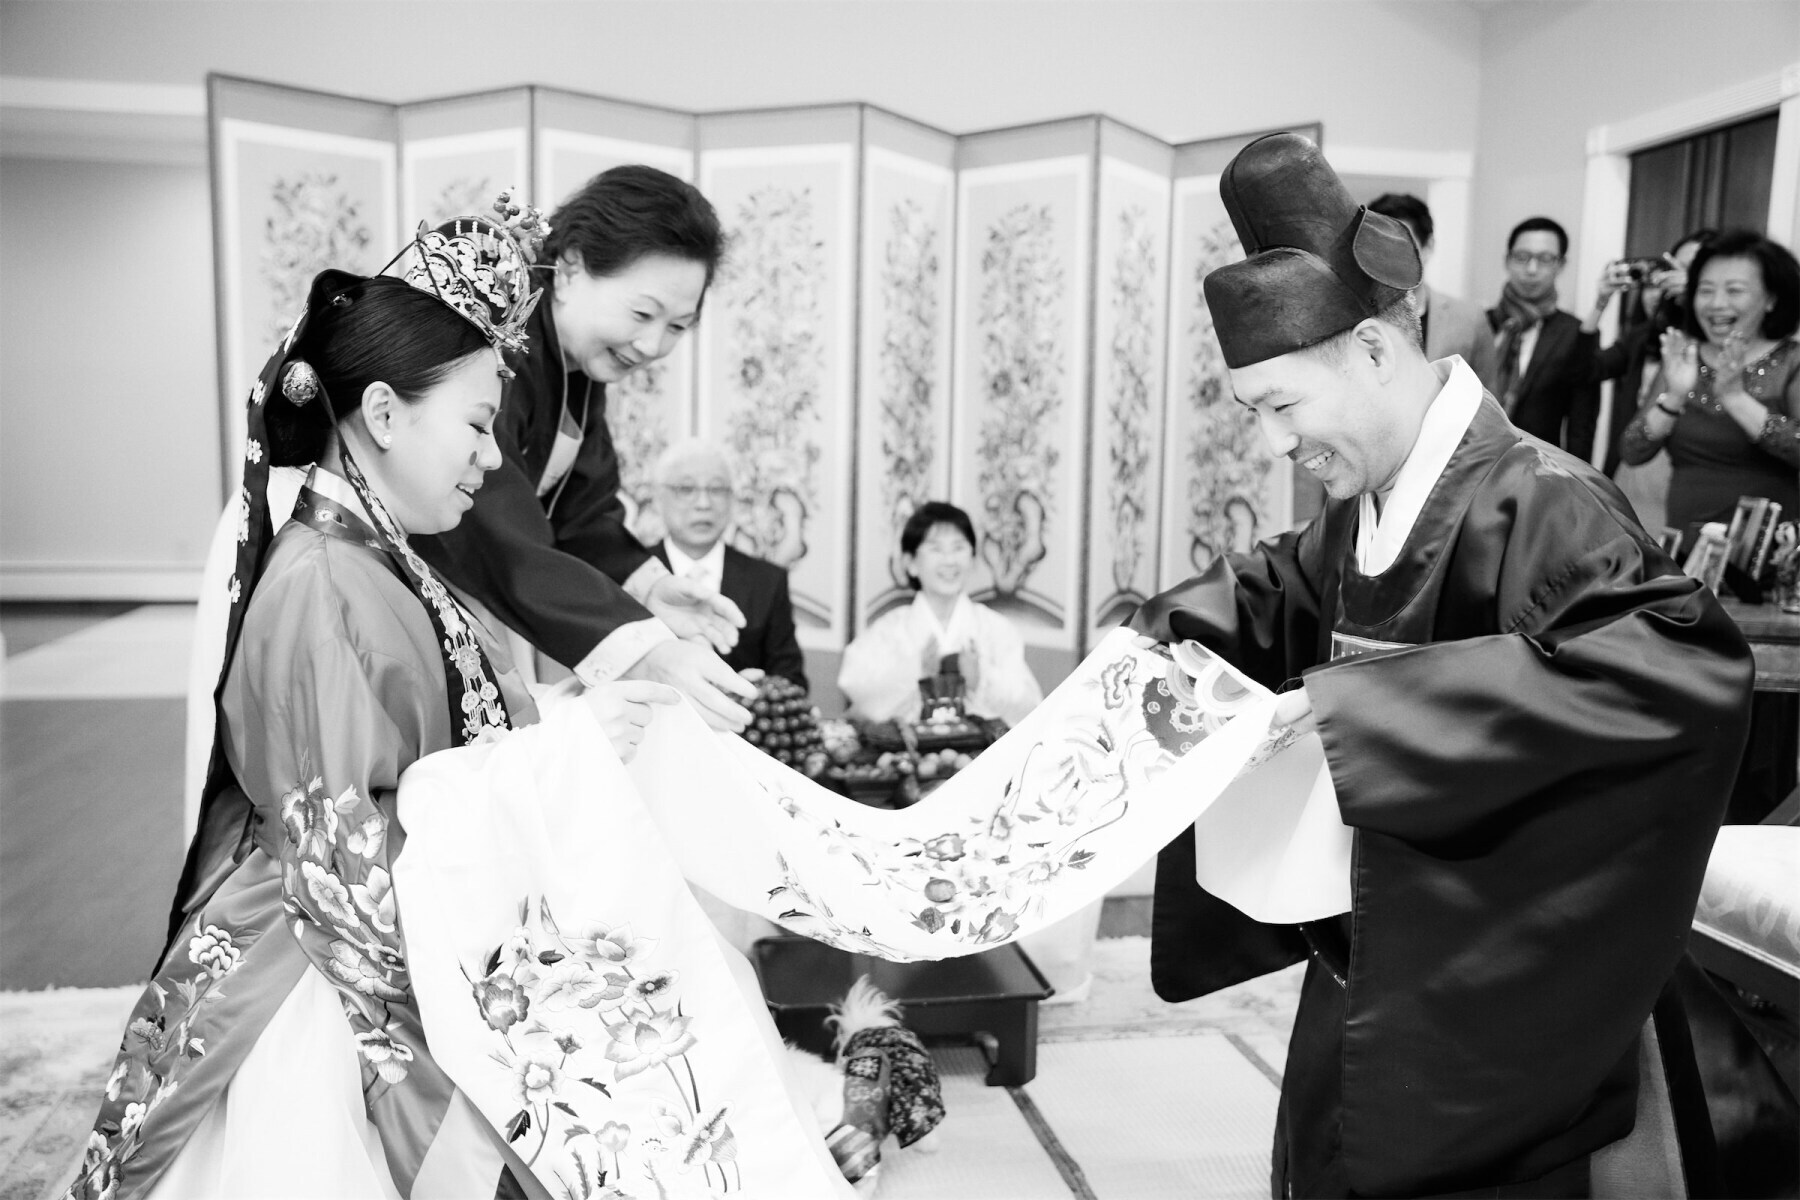 A couple during their Pyebaek ceremony at the groom's parents' home before celebrating at their restaurant wedding.